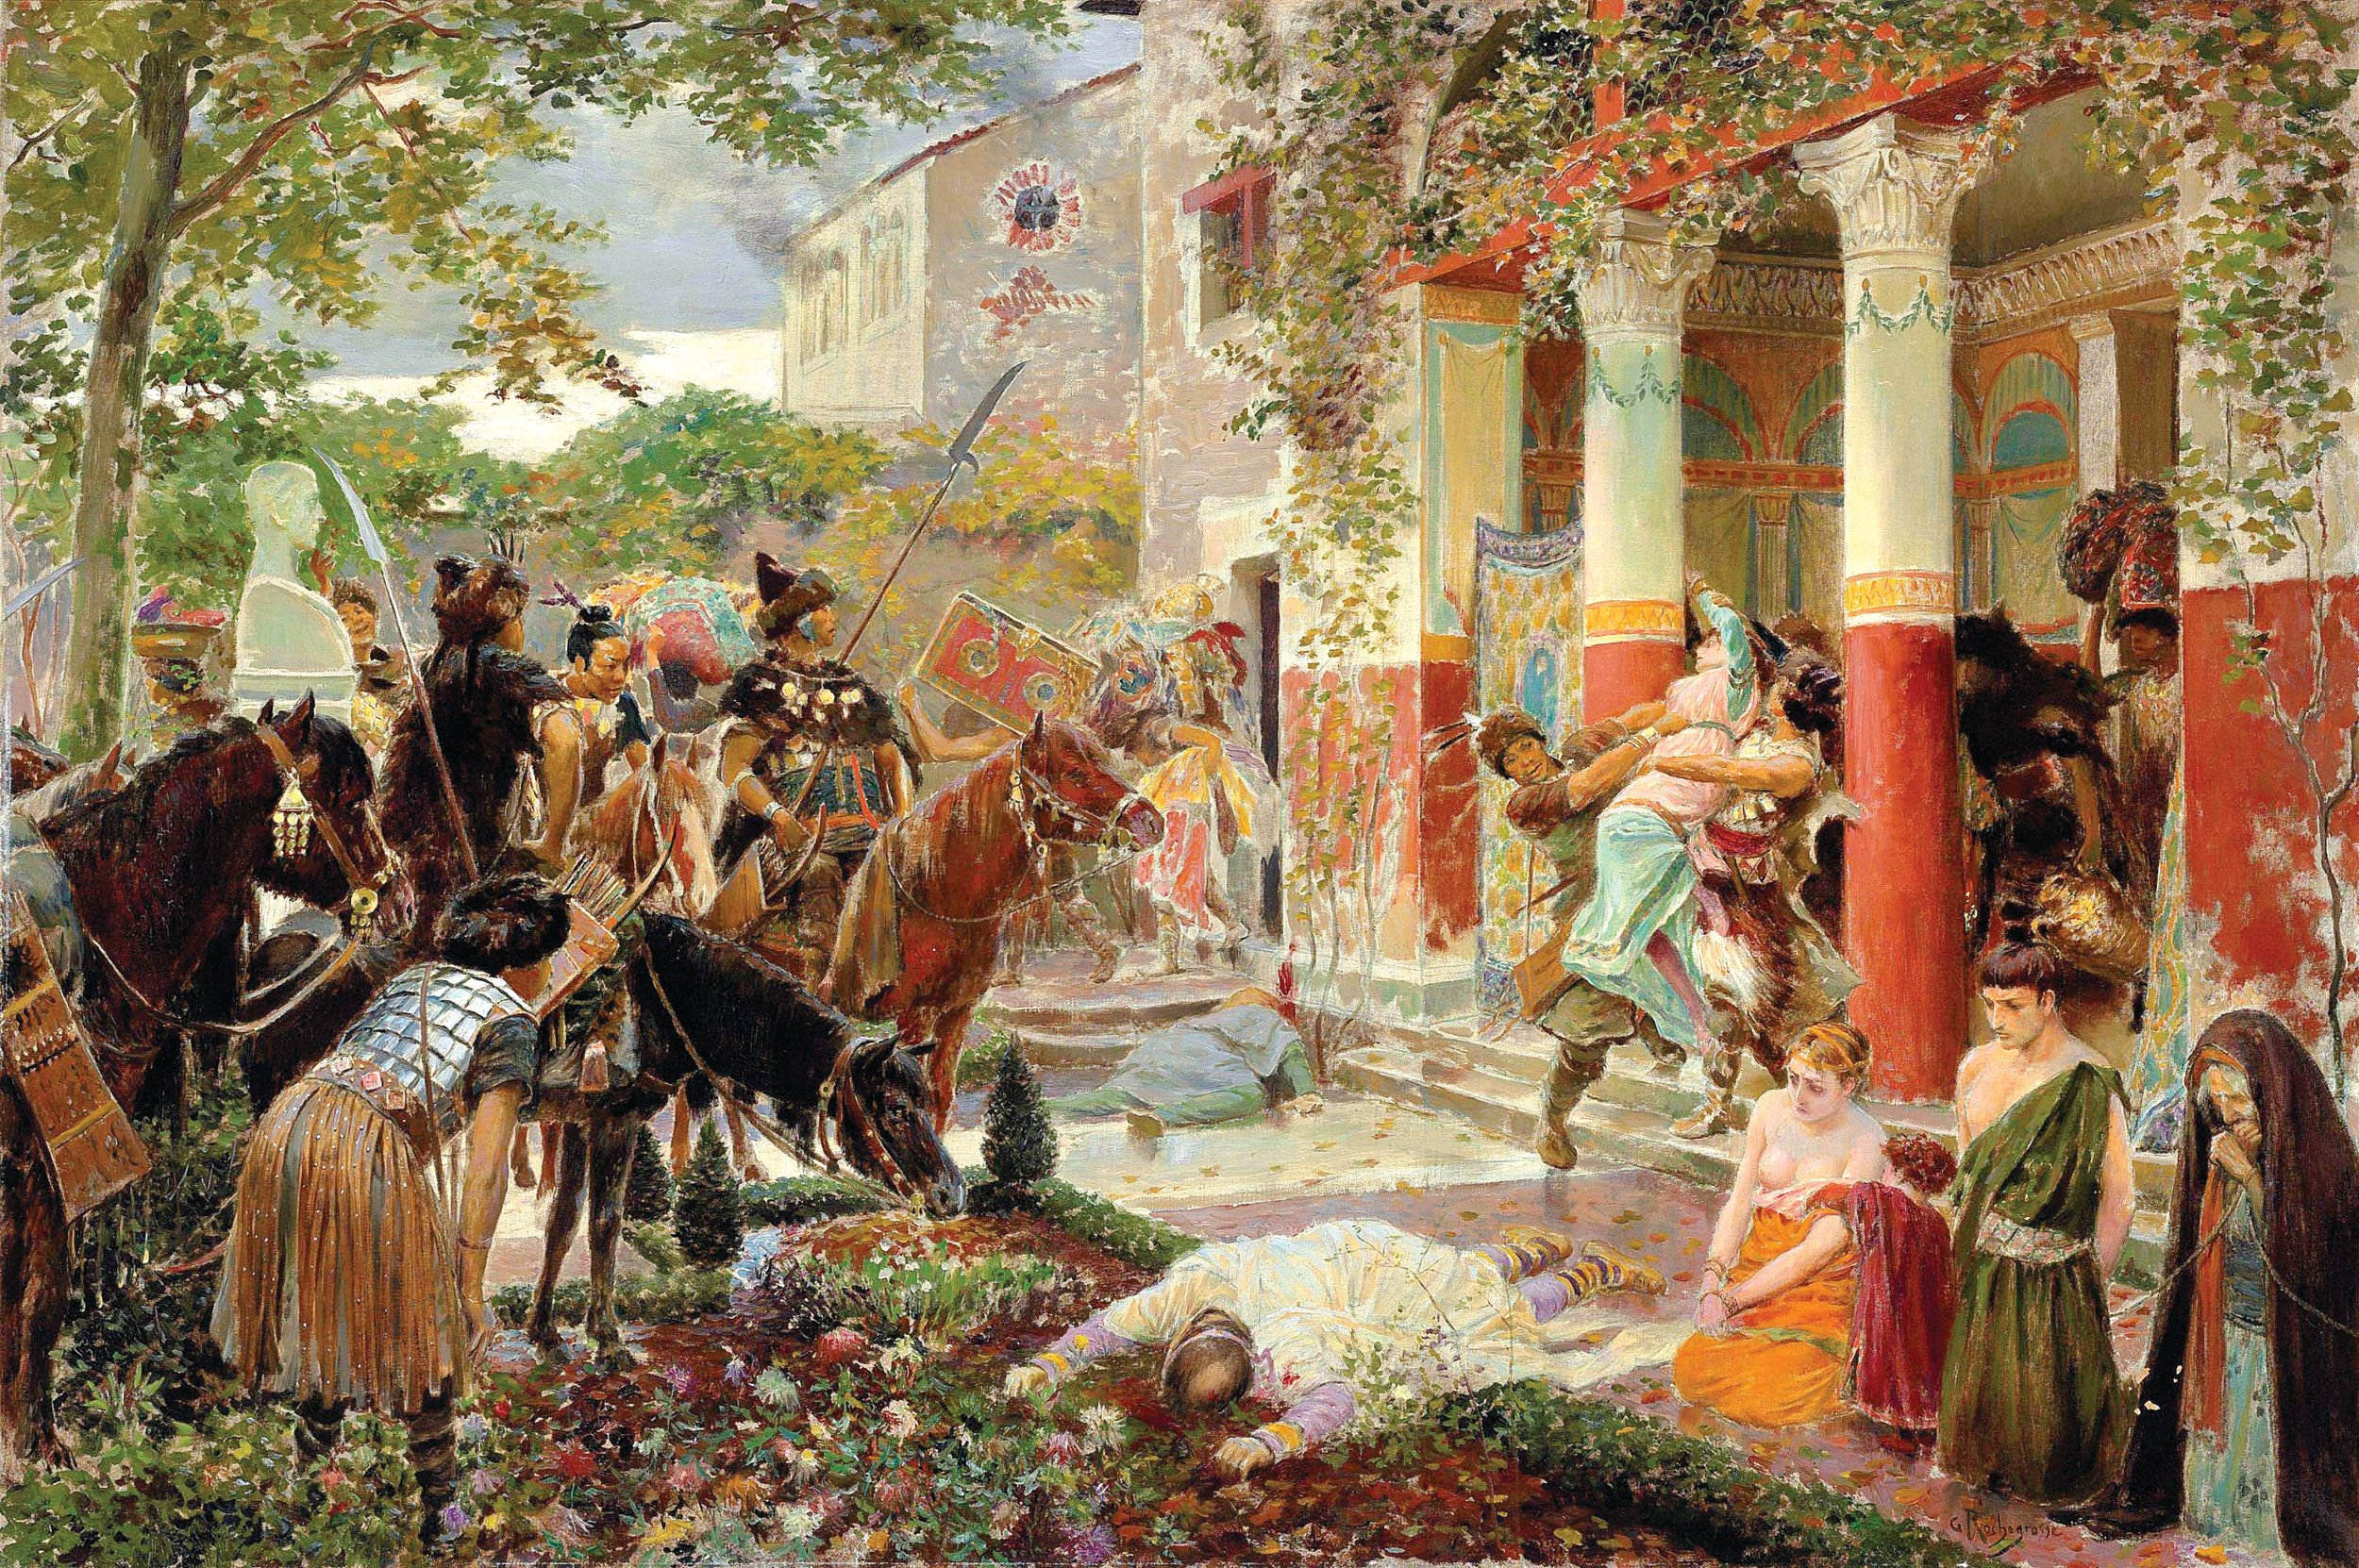 This painting by Georges-Antoine Rochegrosse (1859-1938) depicts a party of Huns ransacking a Roman villa in Gaul. Raids and tributes from the Roman Empire were the largest source of income for the Hunnic confederation under Attila.